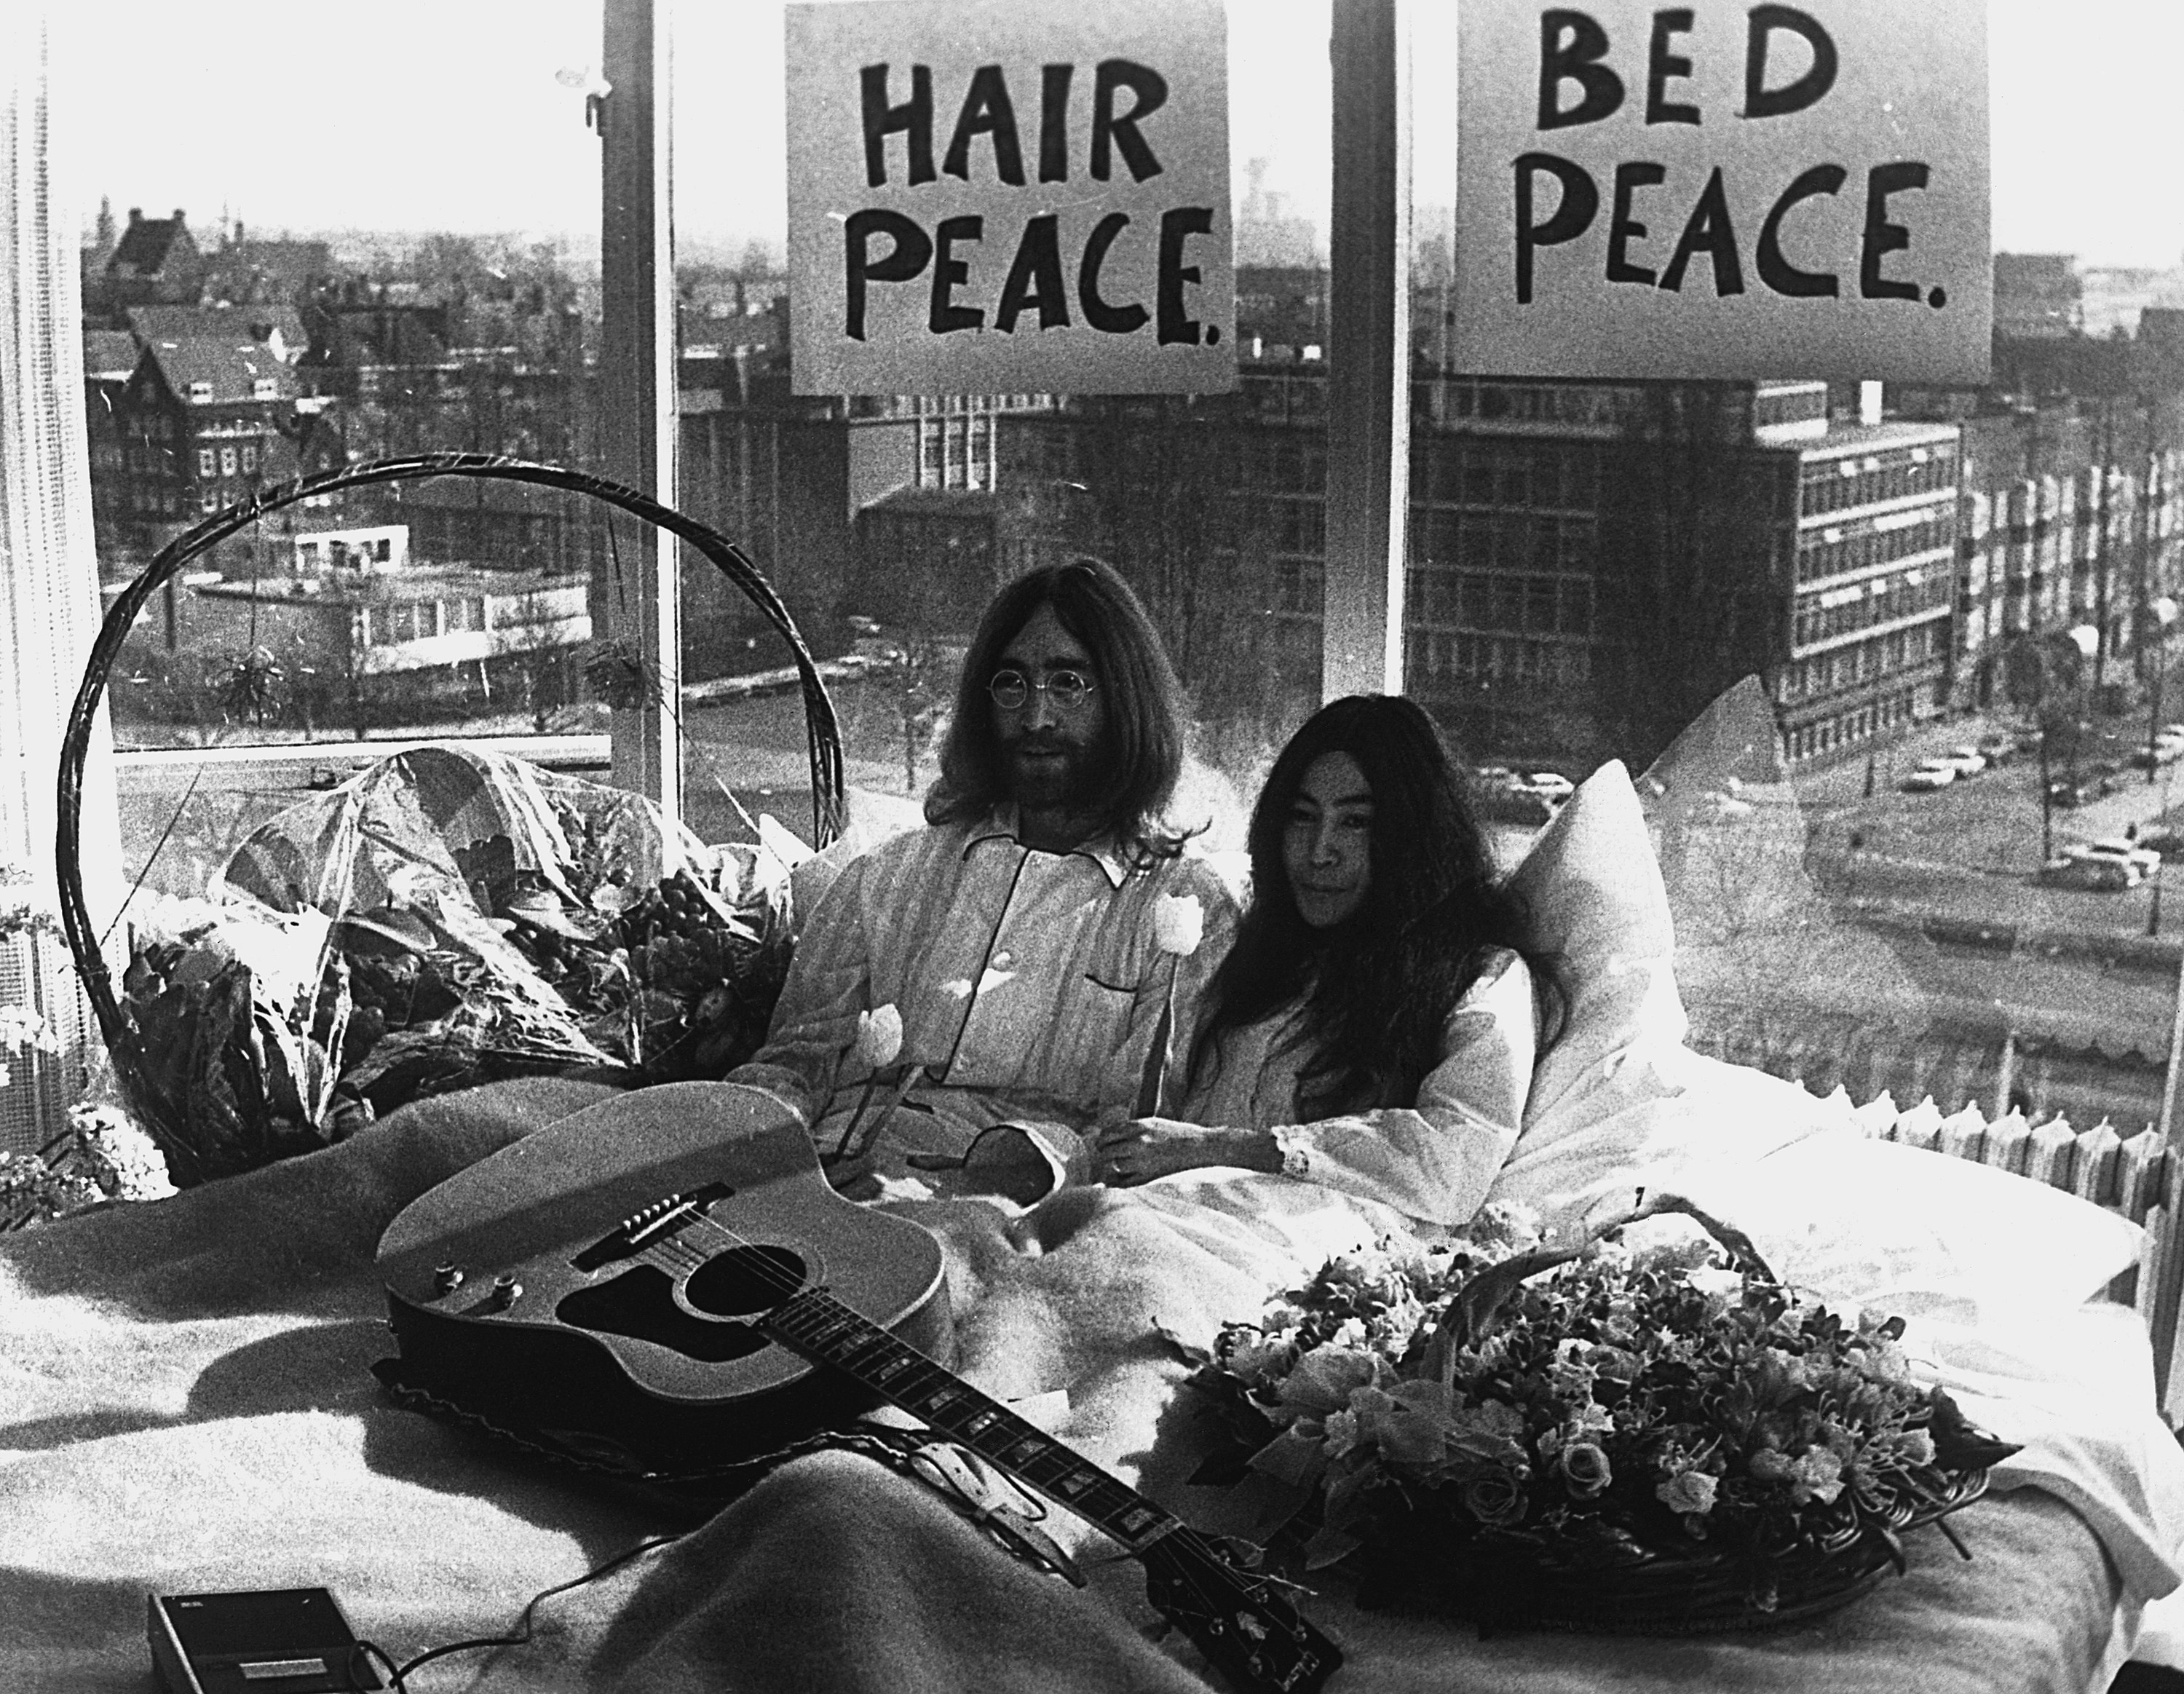 John Lennon and Yoko Ono  in bed with signs behind them that reads hair peace bed peace a guitar and flowers are on the bed